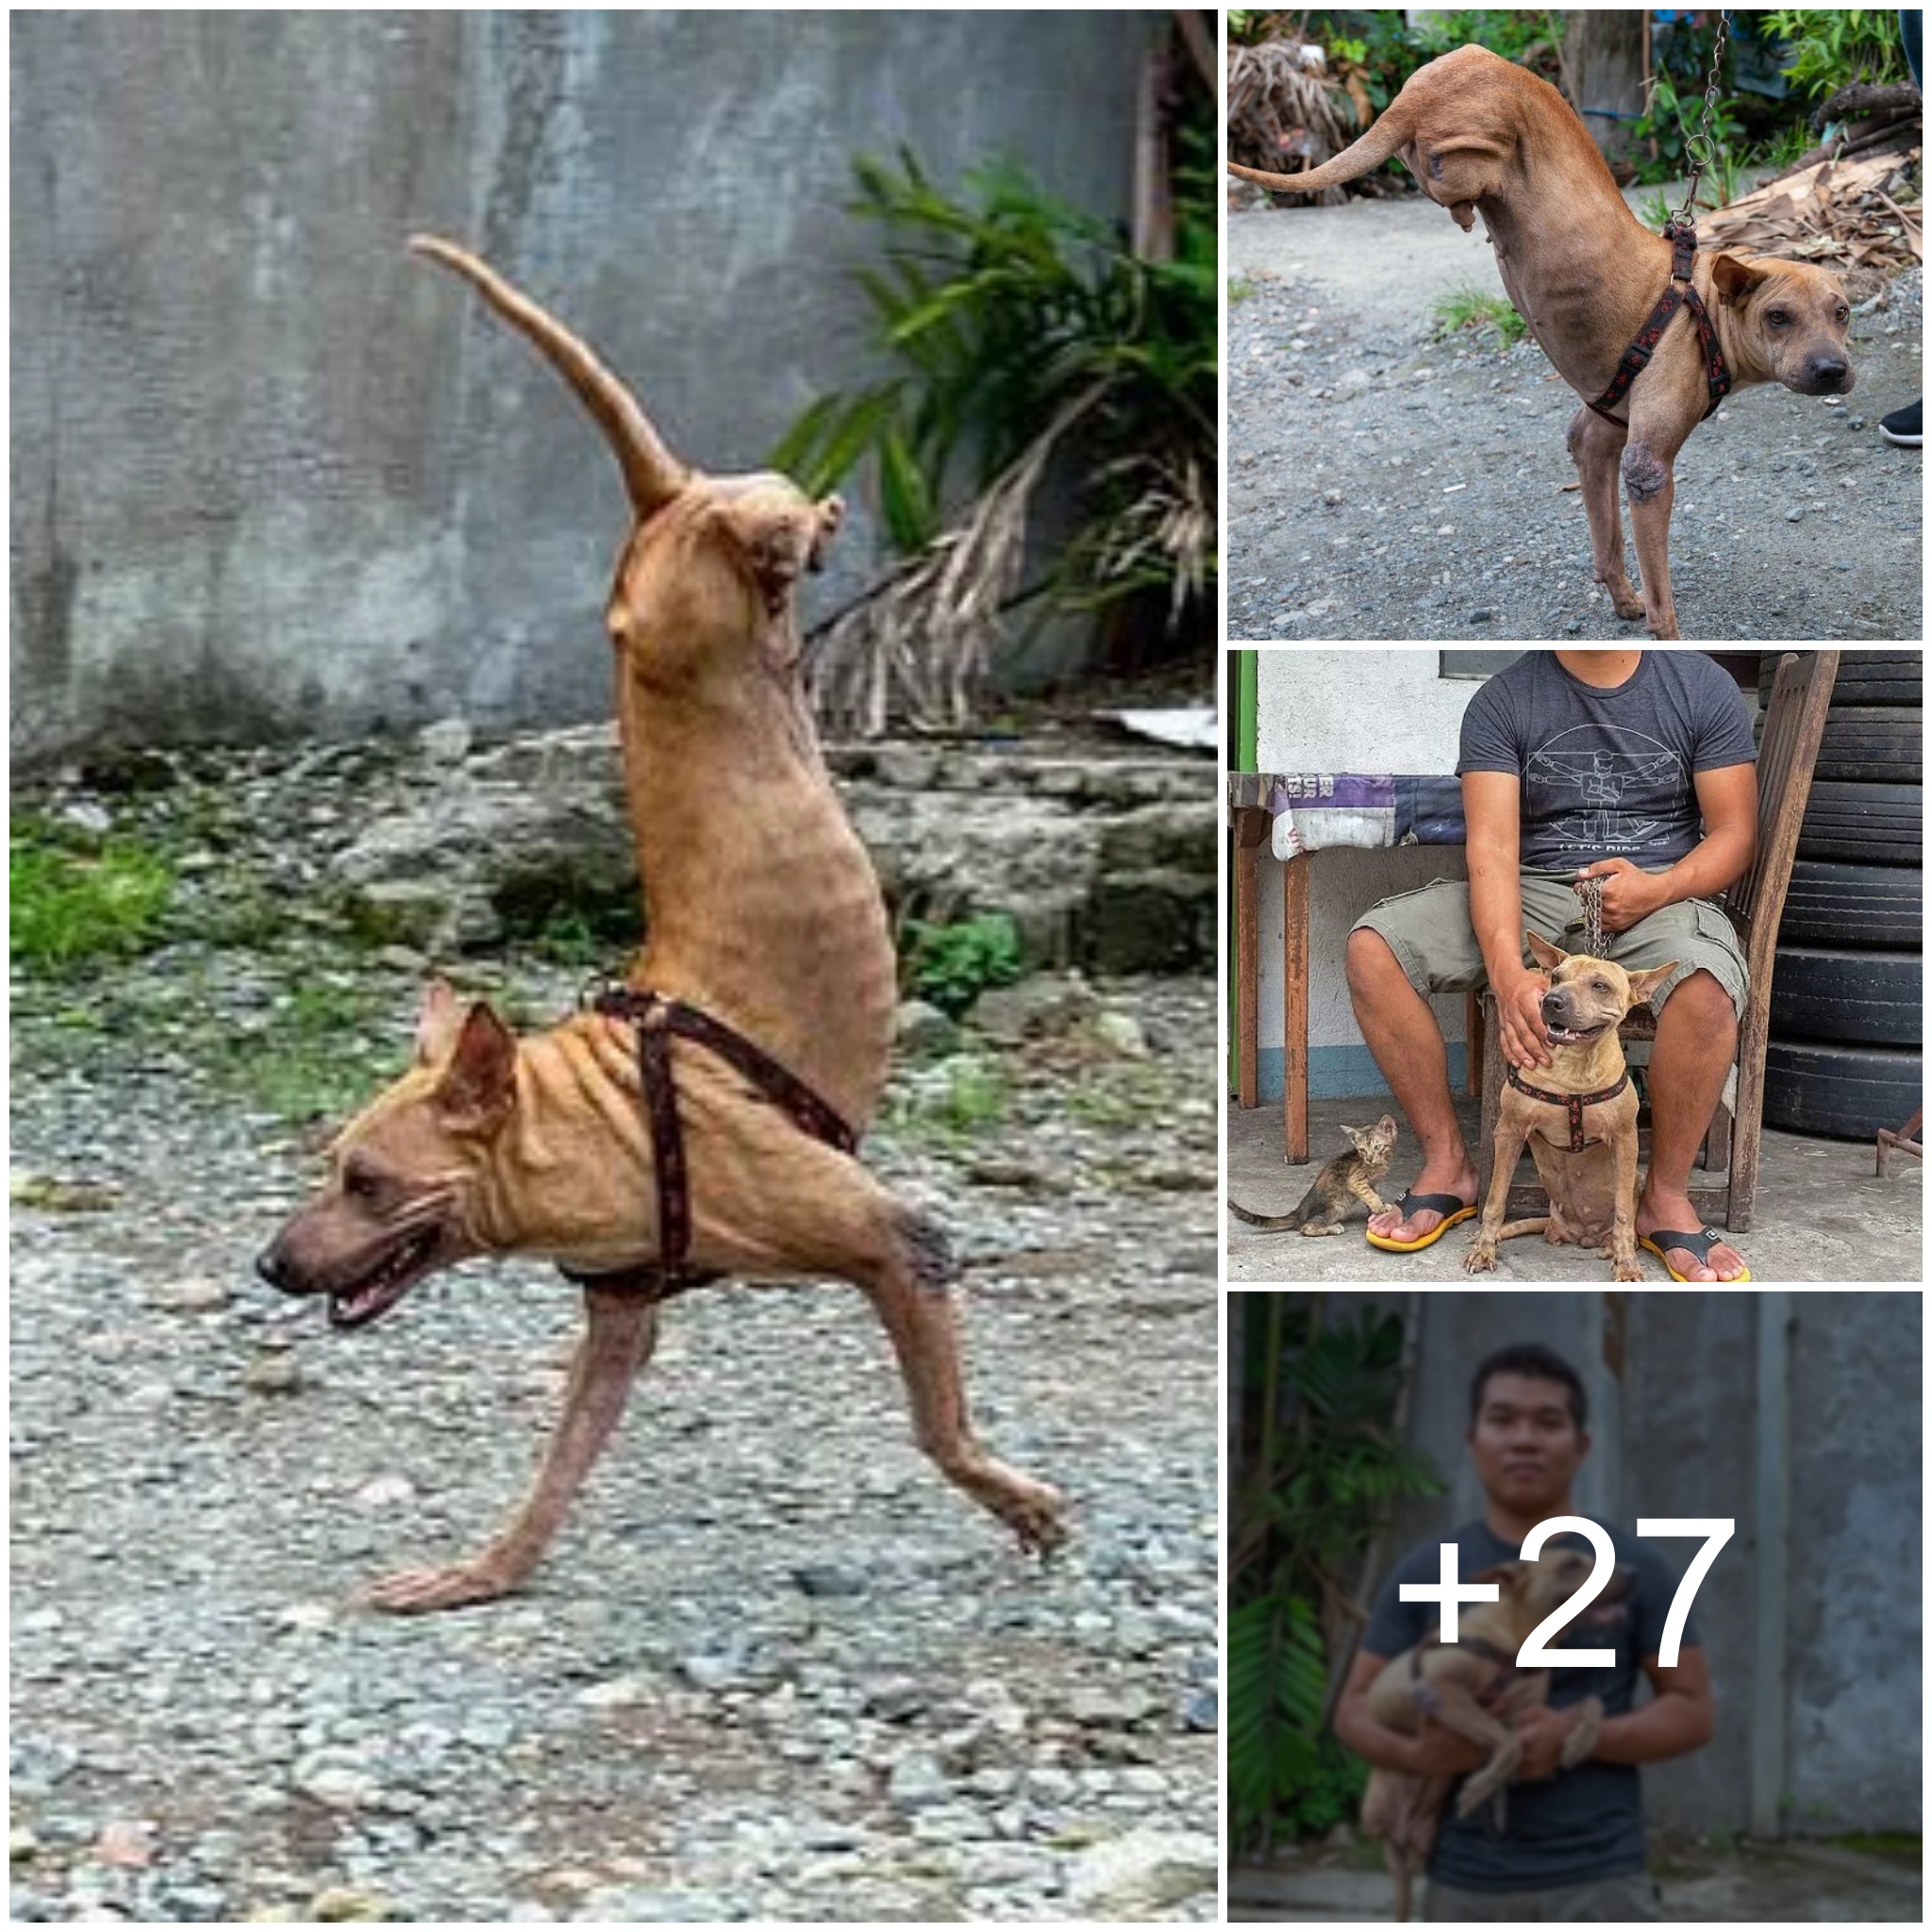 Against All Odds: A Rescued Dog, Saved by a Kind Soul, Strives to Survive in a Way That Defies Comprehension, Despite Facing the Challenge of Missing Hind Legs.